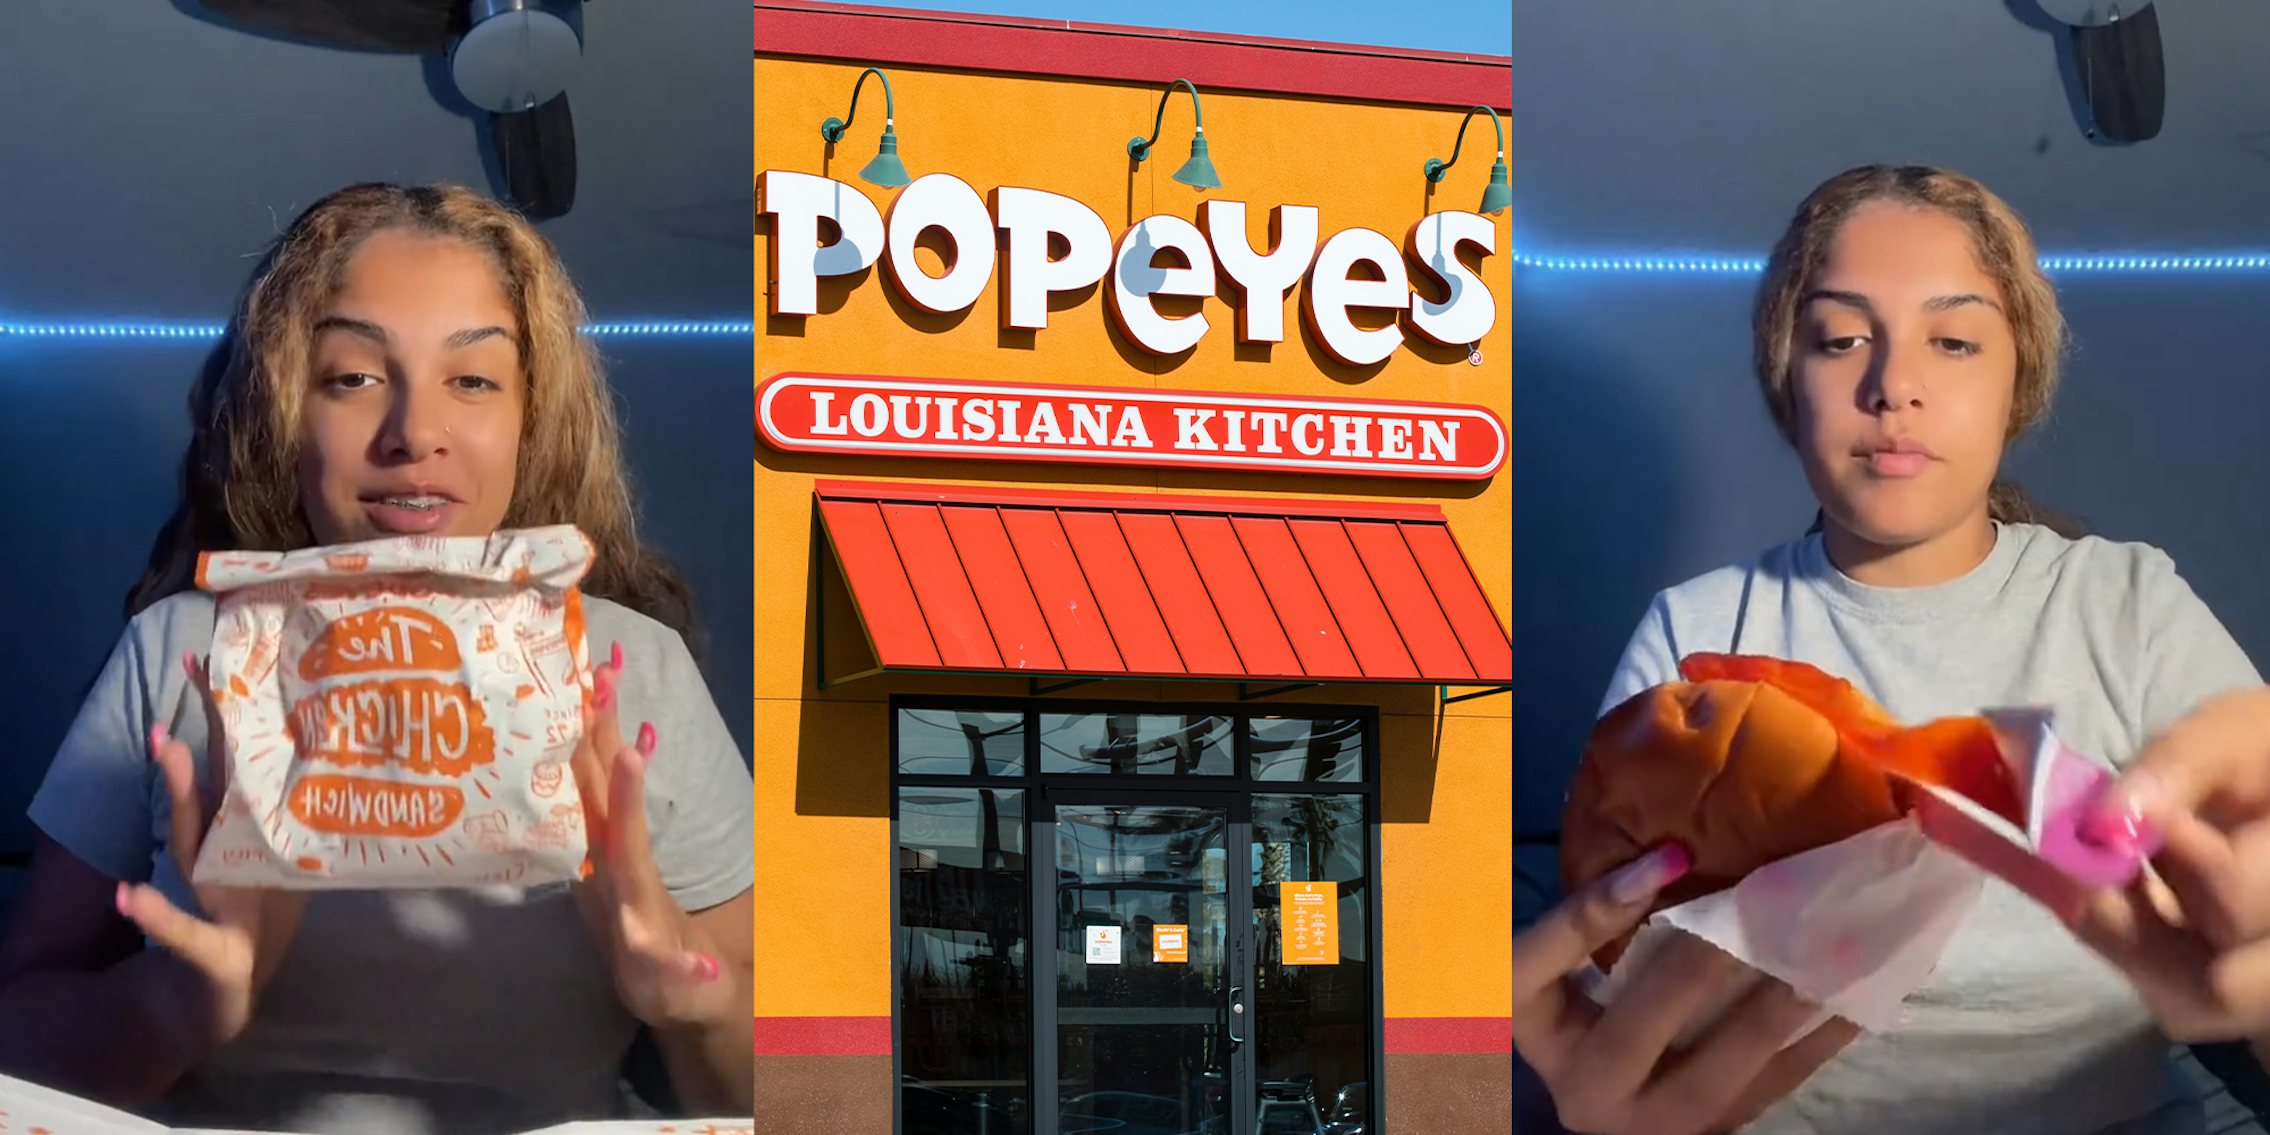 Popeye's customer says worker was rude and charged her $1 when she asked for sauce